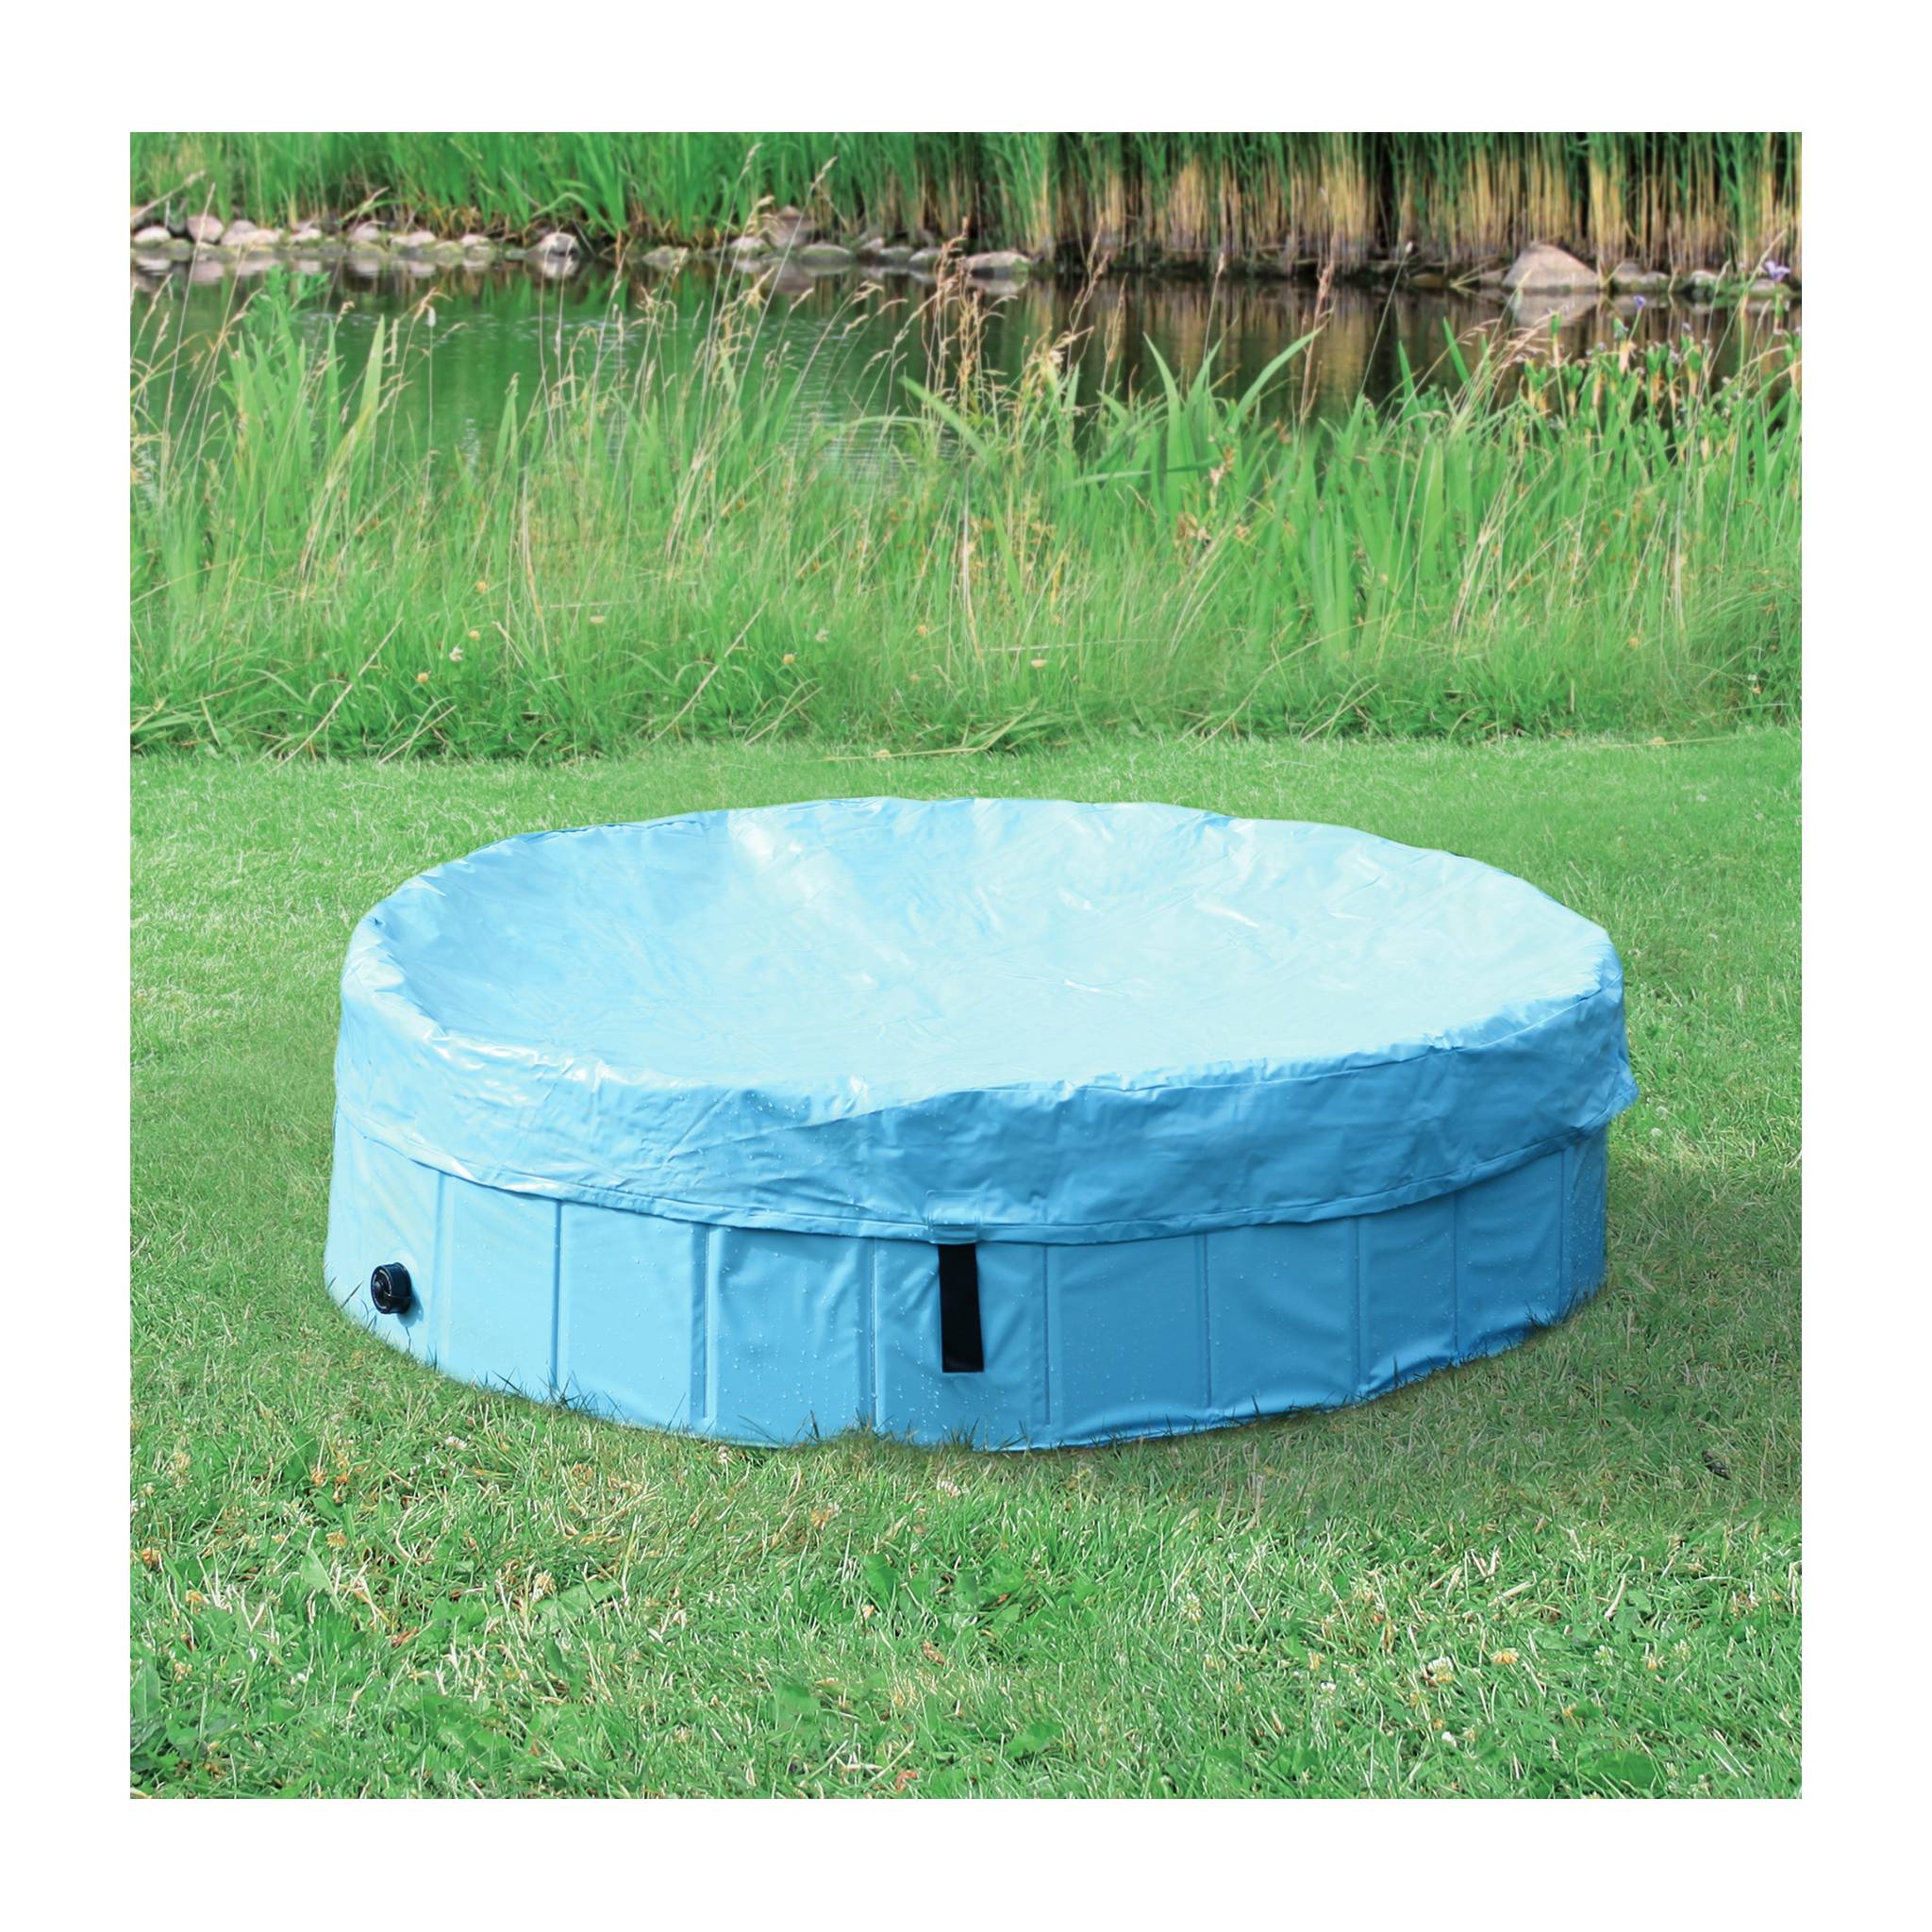 Cover for dog pool